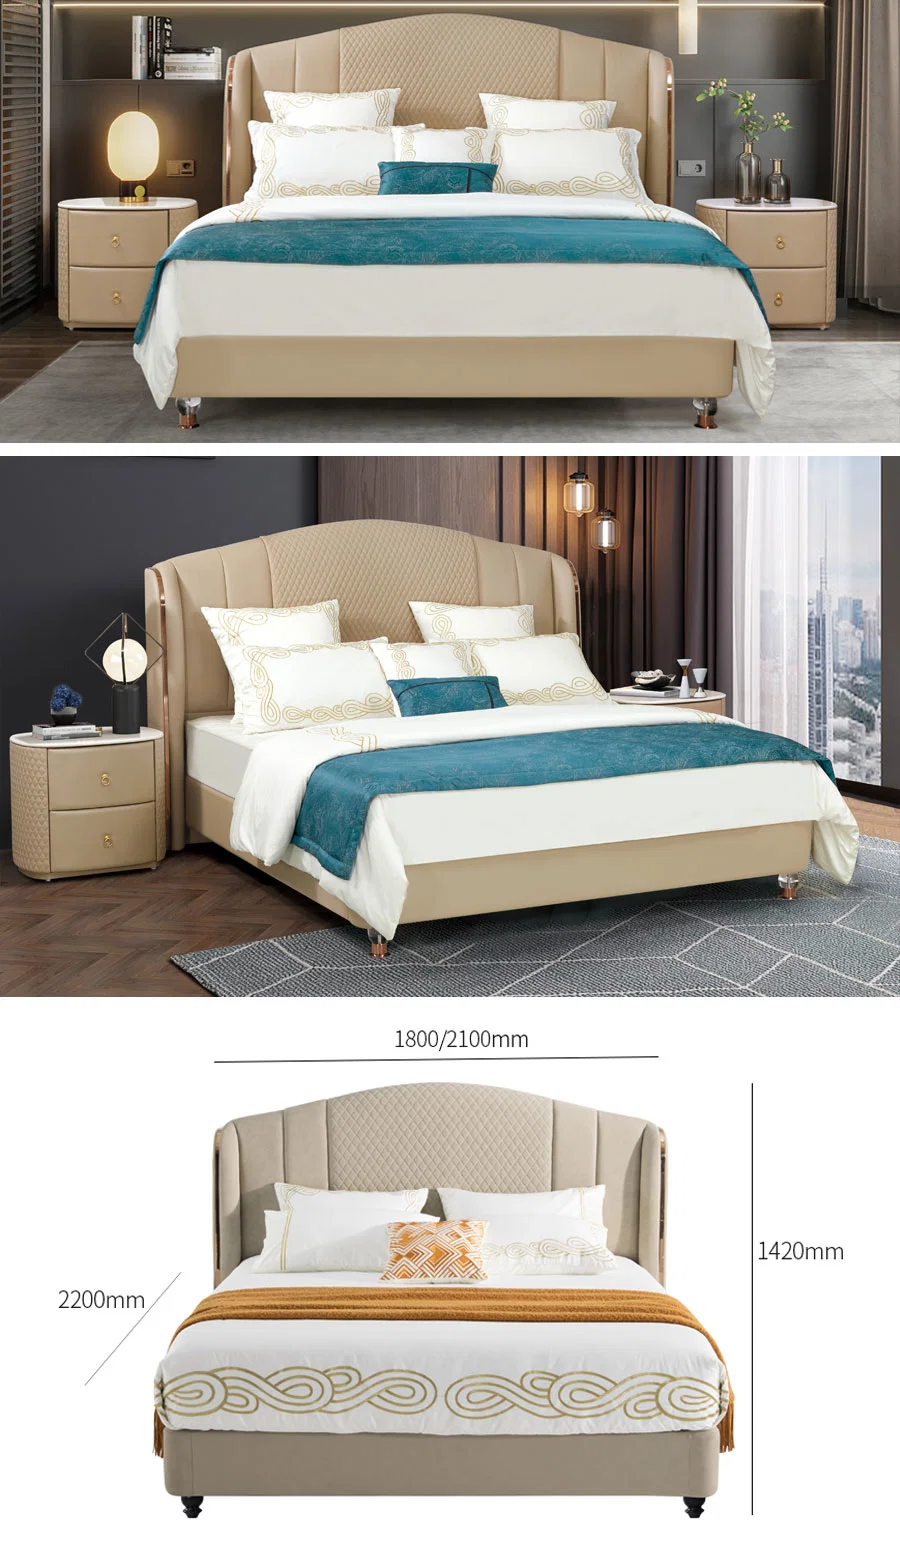 Luxury Modern 5 Star Hotel Room Master Bed King Queen Size Full Size Bedroom Furniture Set